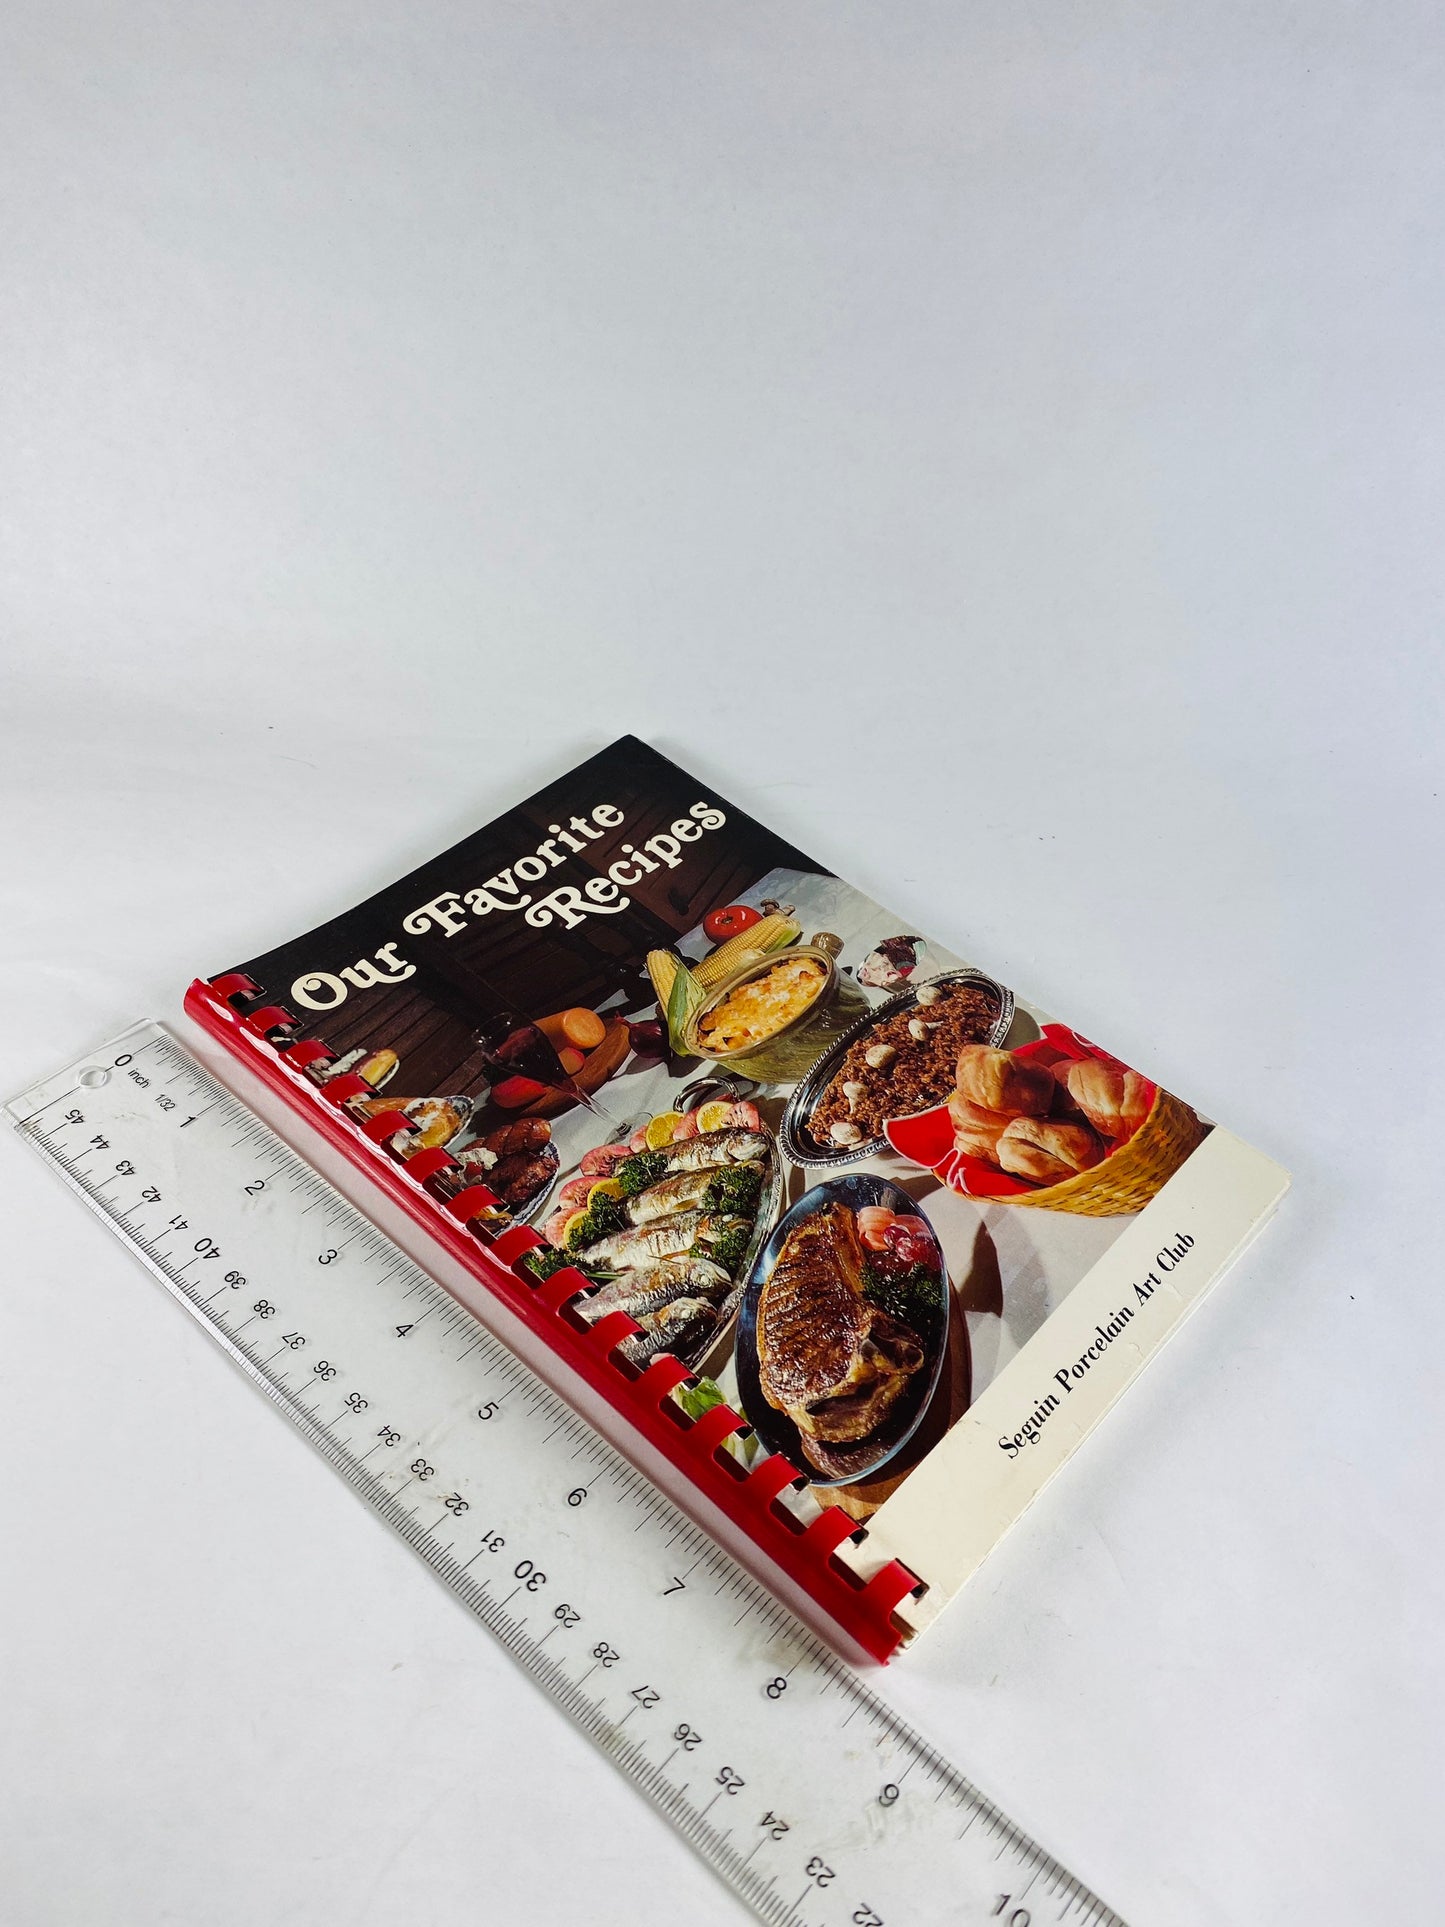 1978 Favorite Recipes of Texas vintage cookbook from the Seguin Porcelain Art Club in Texas. Over 900 recipes.